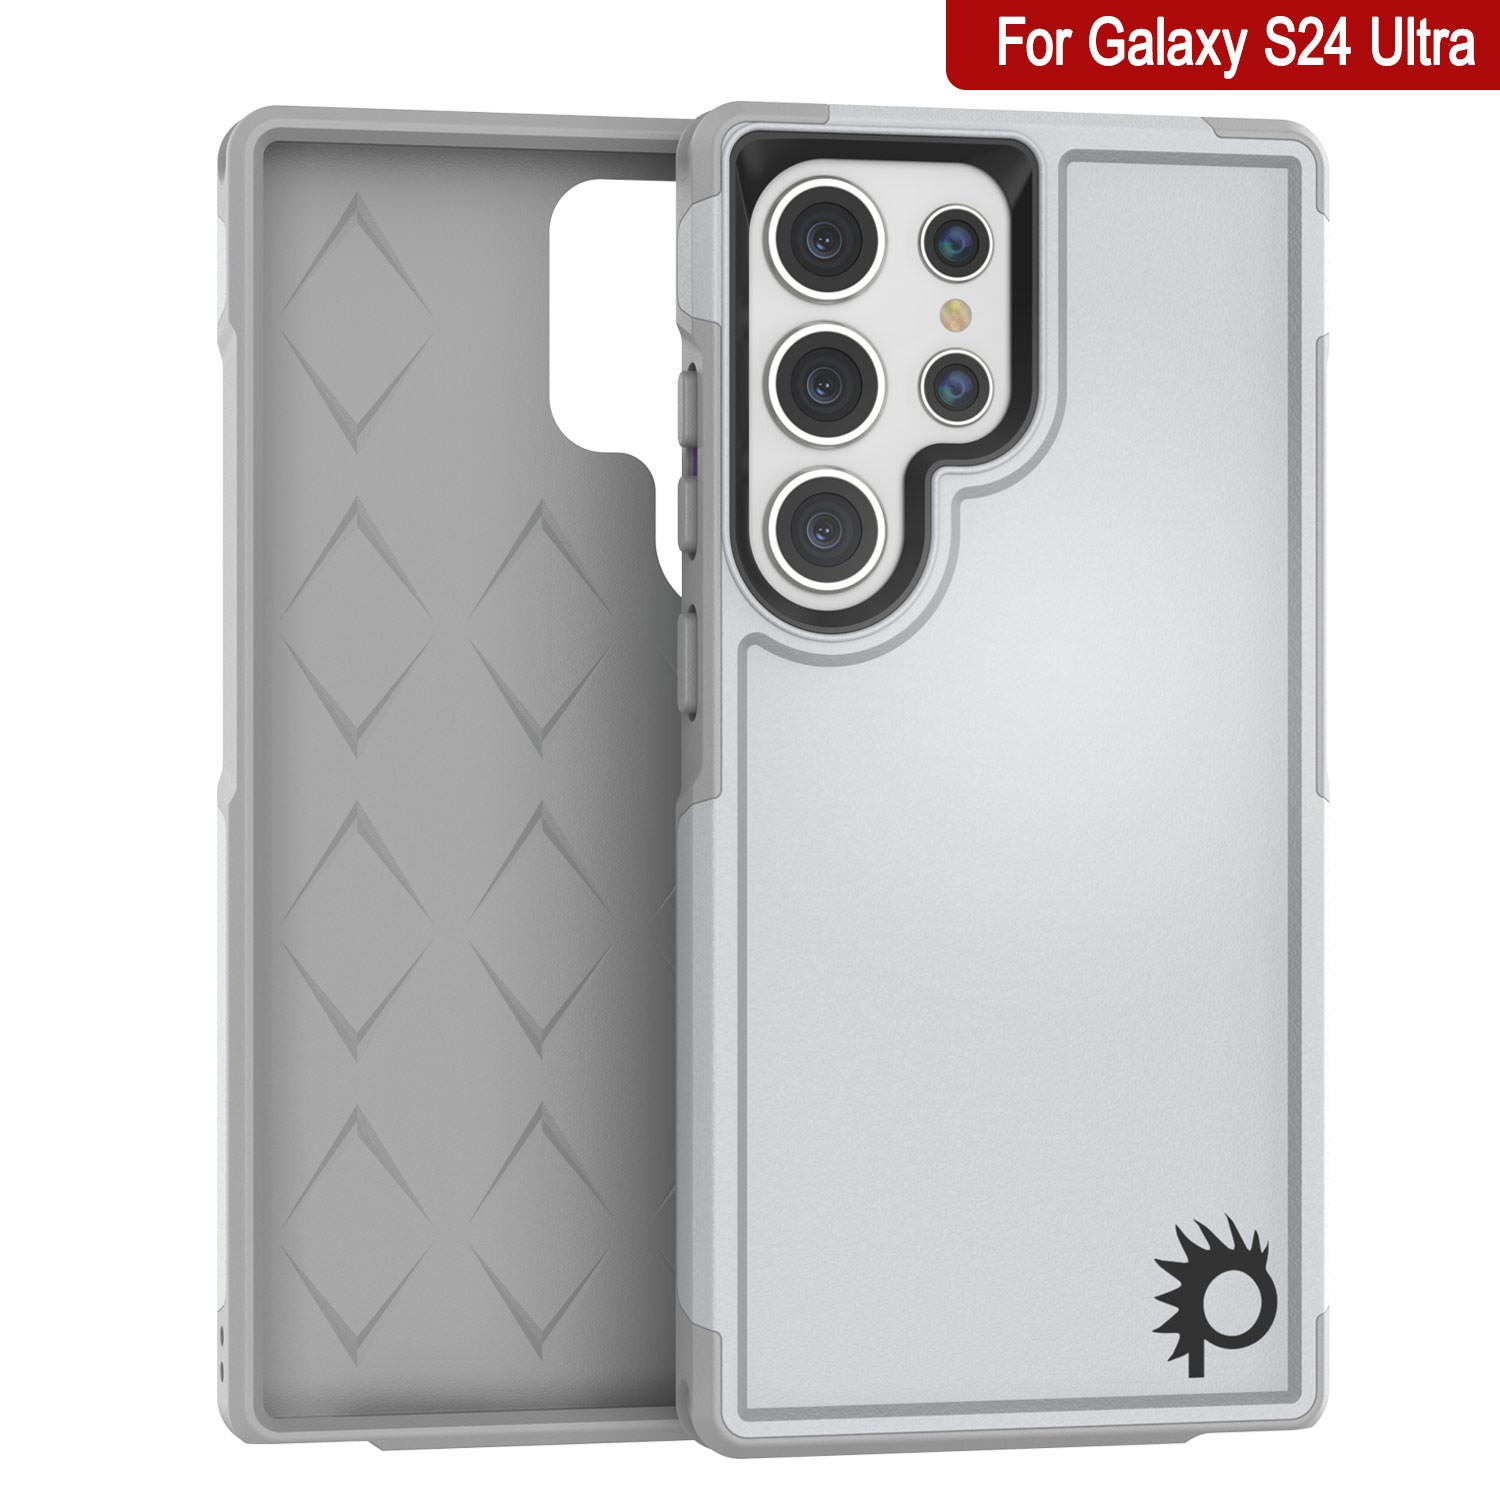 PunkCase Galaxy S24 Ultra Case, [Spartan 2.0 Series] Clear Rugged Heavy Duty Cover [White]